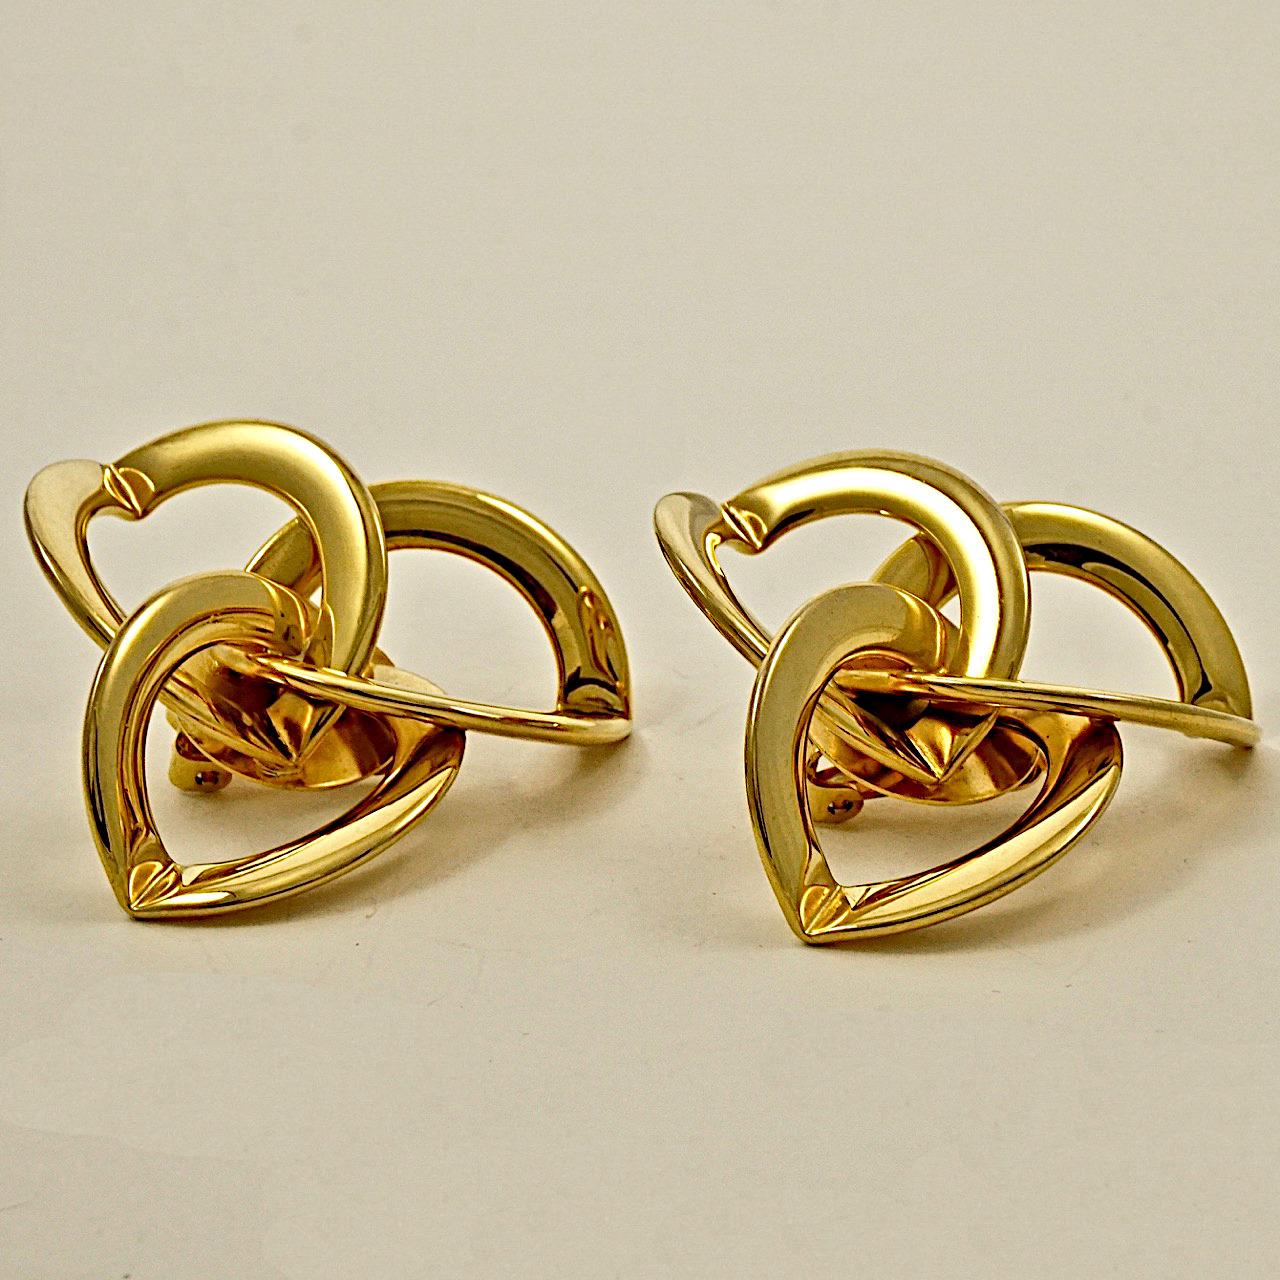 Gold plated clip on earrings, featuring intersecting triple hoops. Measuring diameter 4.8 cm / 1.88 inches. The earrings are in very good condition.

This is a pair of stylish vintage statement earrings from the 1980s.